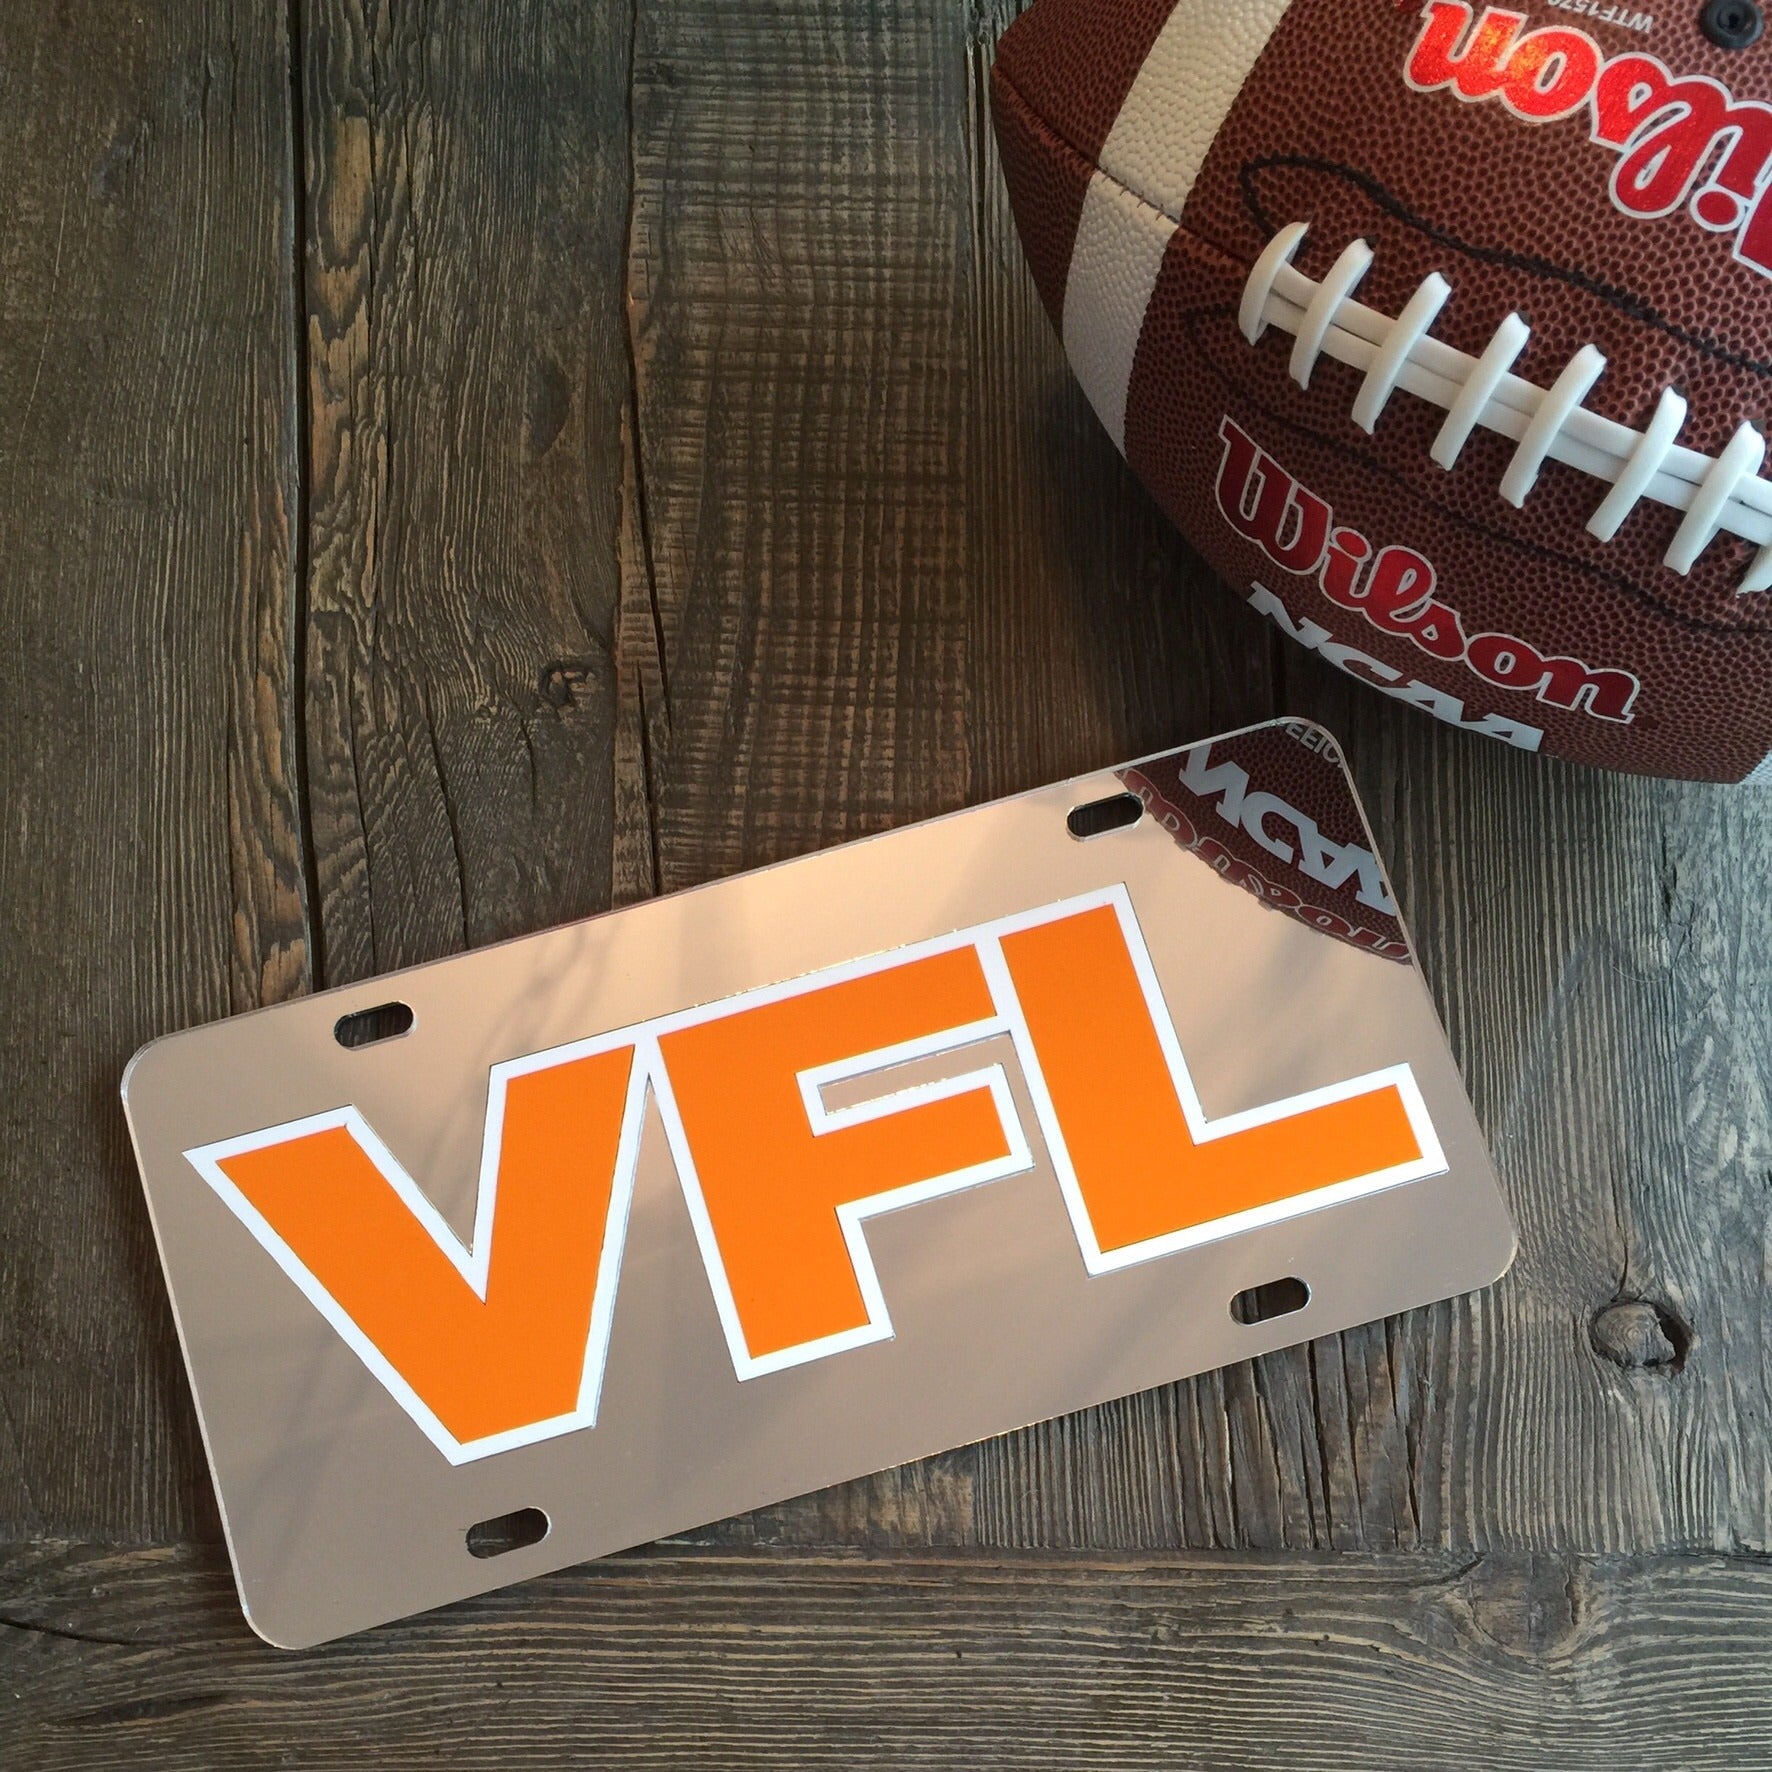 Tennessee "VFL" License Plate